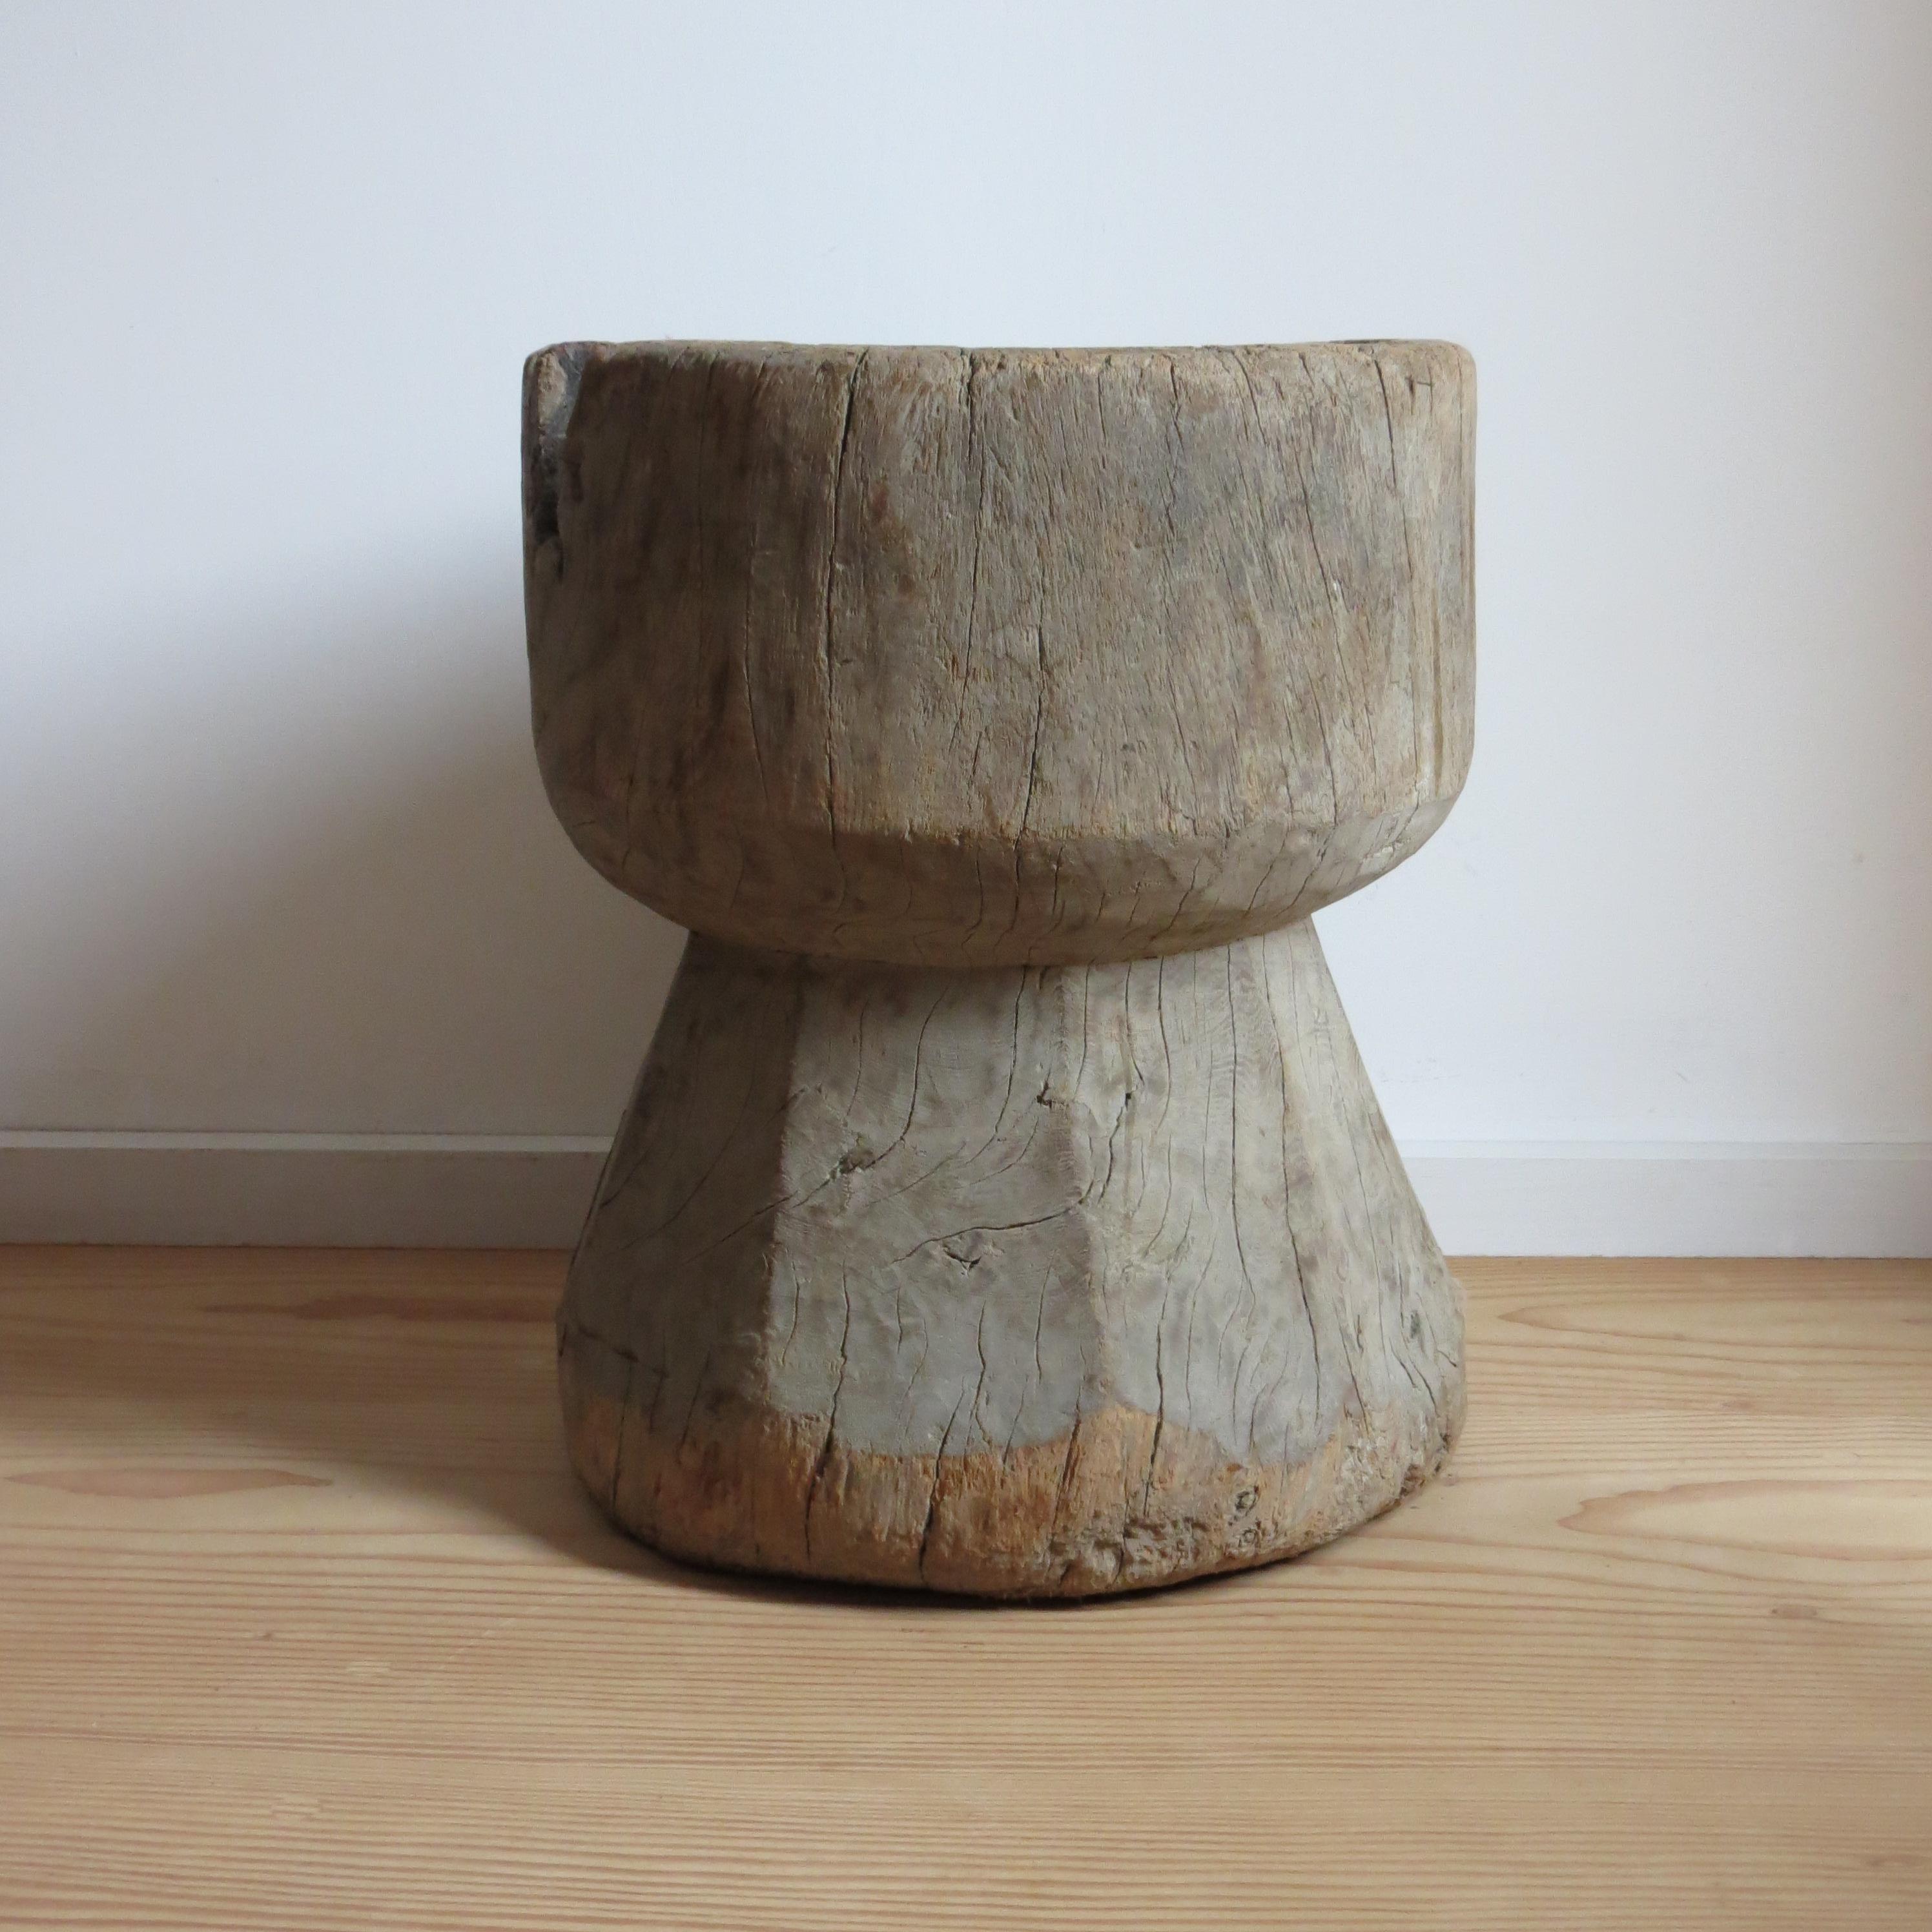 A wonderful primitive rustic wooden mortar.
Made from hardwood, this piece has been hand crafted.
The piece is very versatile and can be used as a plant holder or as a large bowl or turned to be a small table.
In wonderful original condition, with